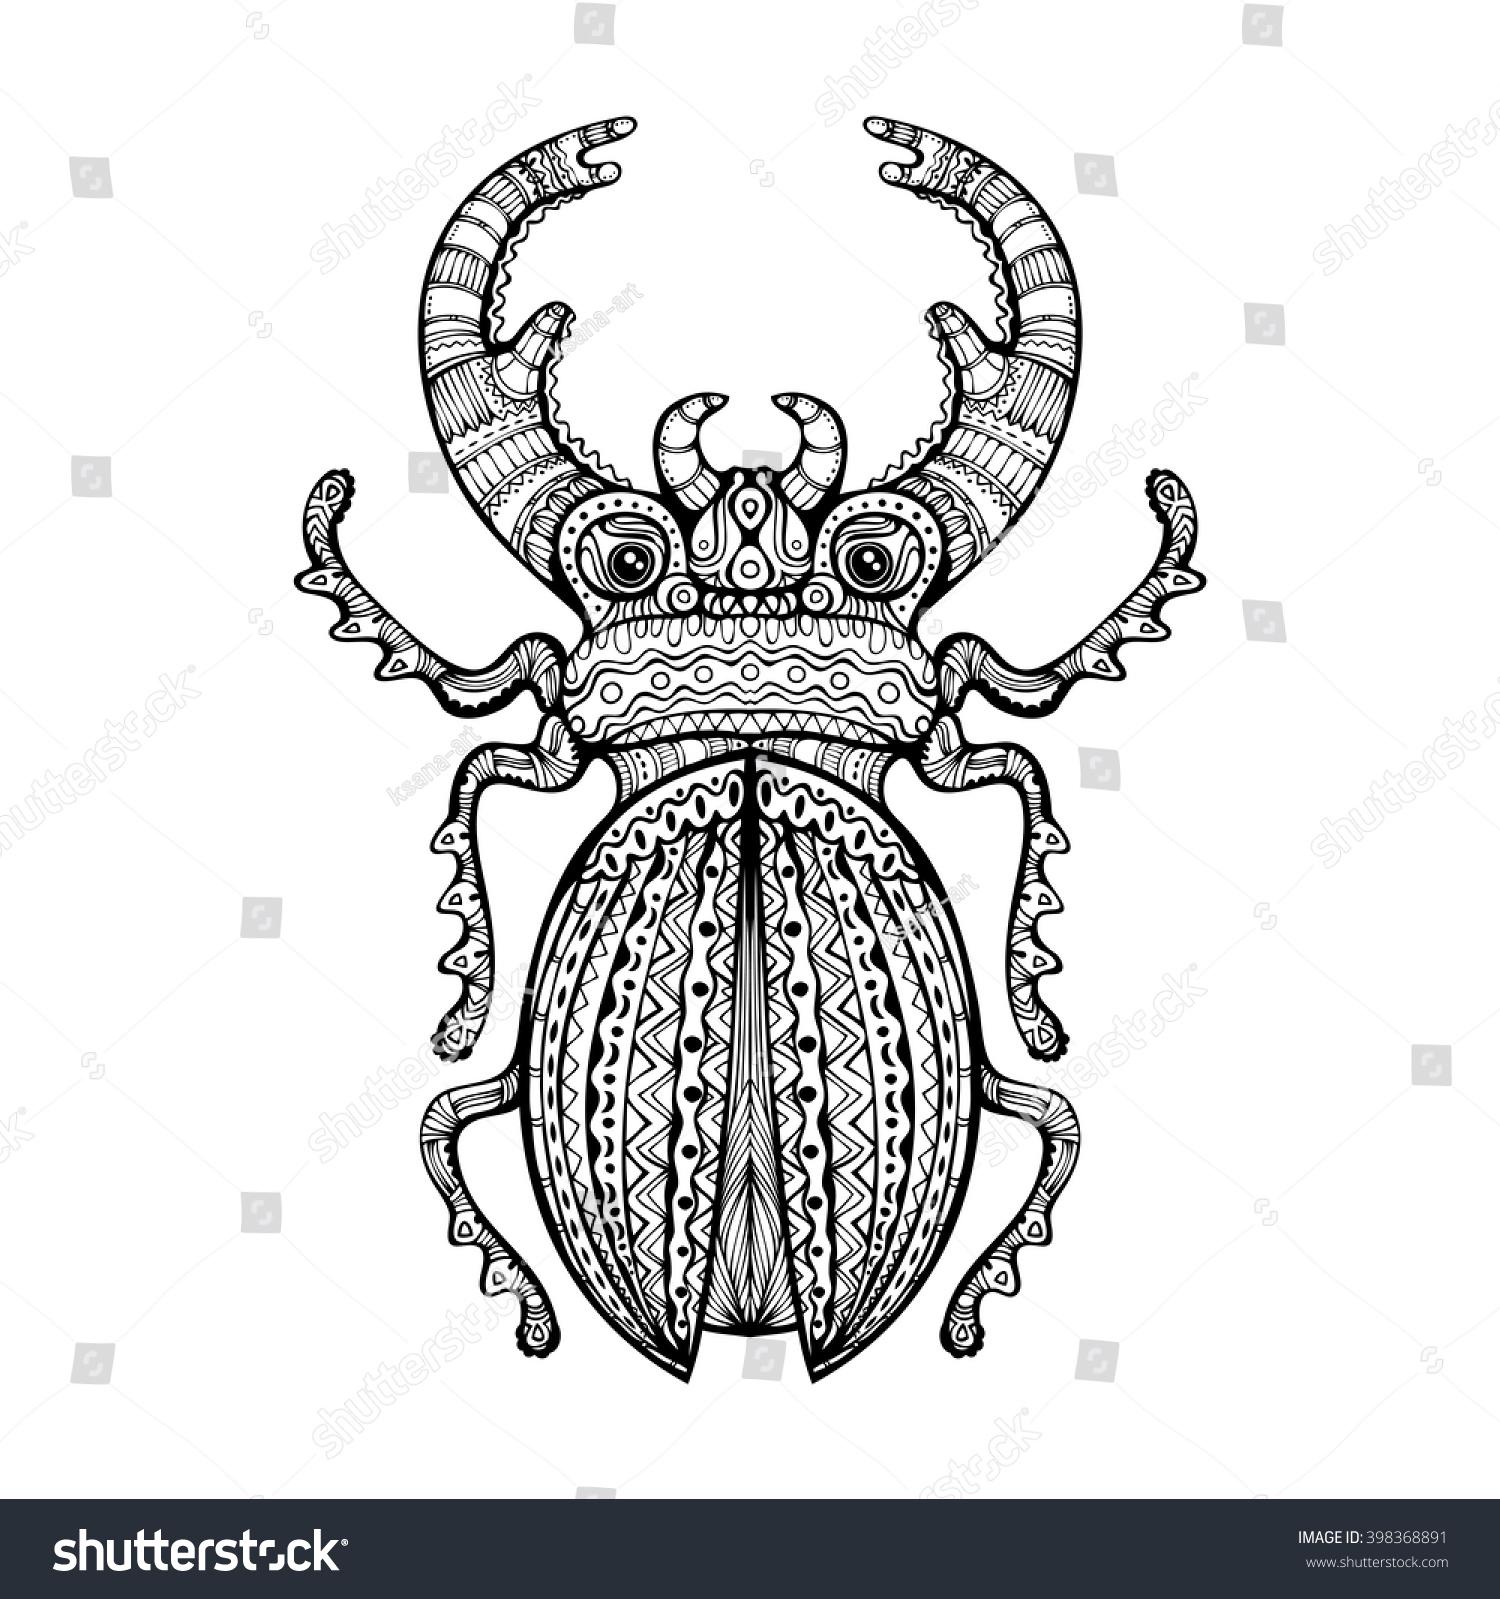 Ornate Giant Stag Beetle. Black And White Decorative Fancy Insect Hand ...